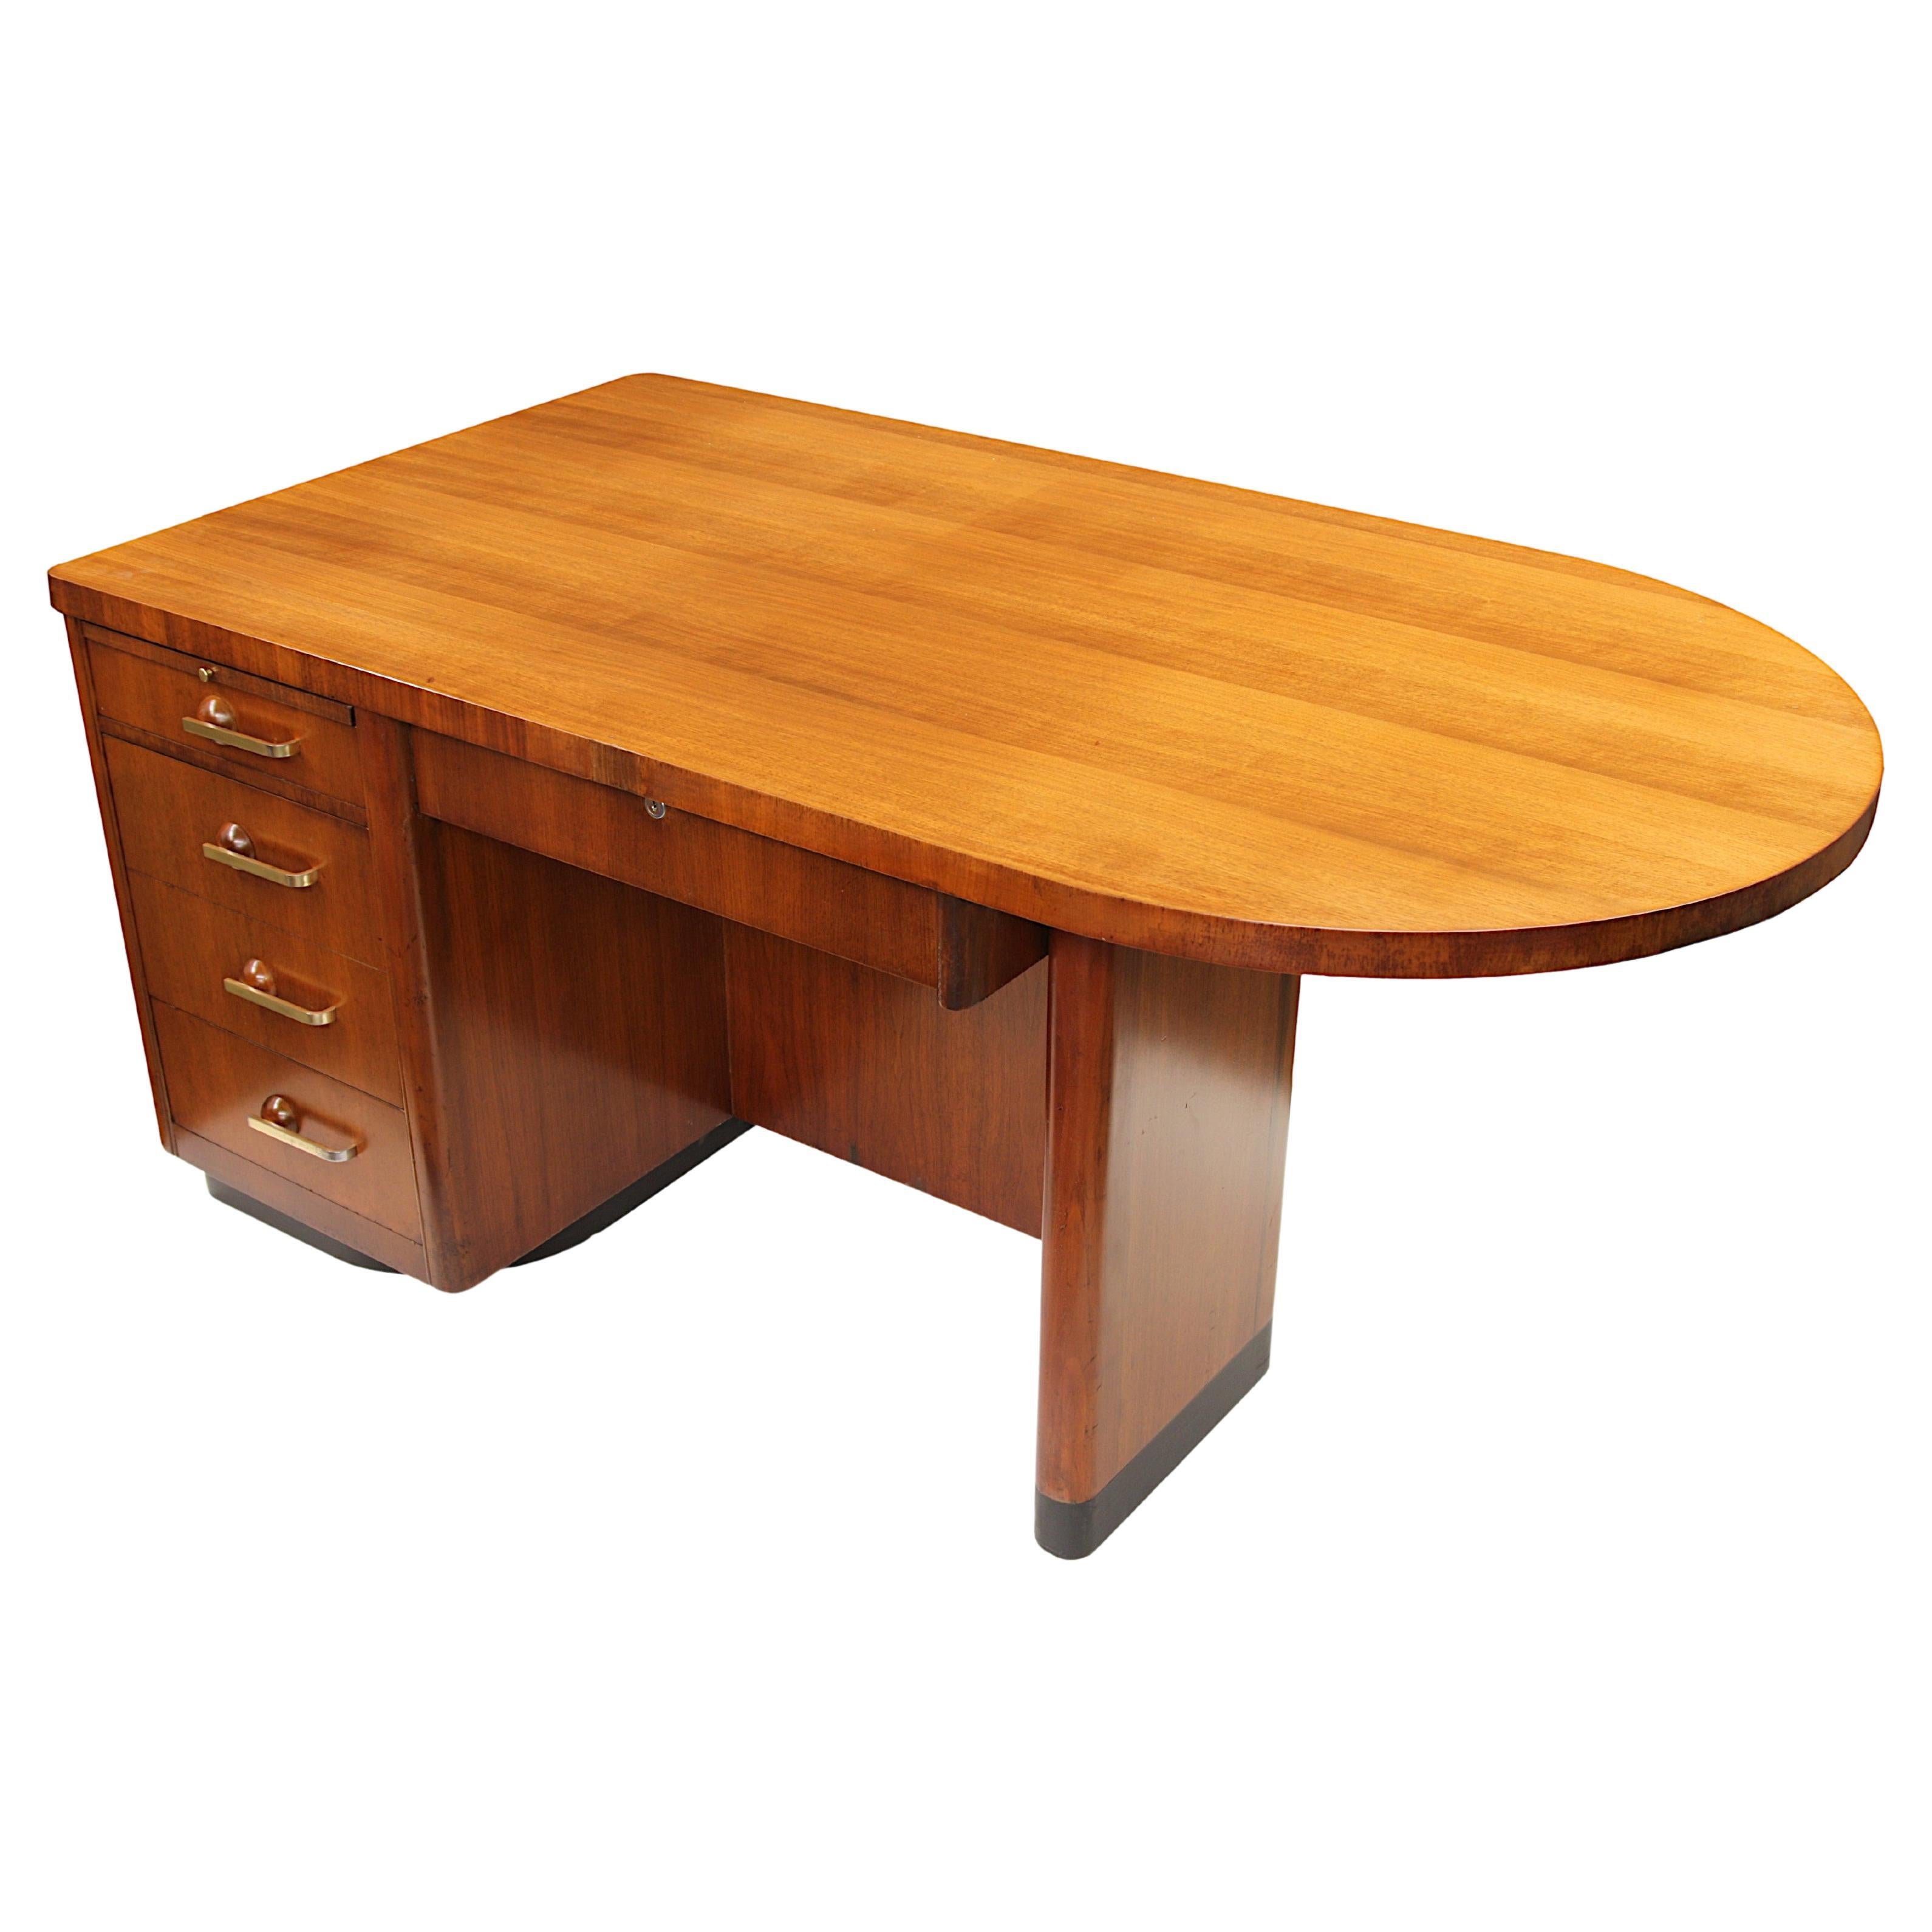 Rare 1950s Mid-Century Modern Art Deco Inspired Walnut Rounded Top Desk For Sale